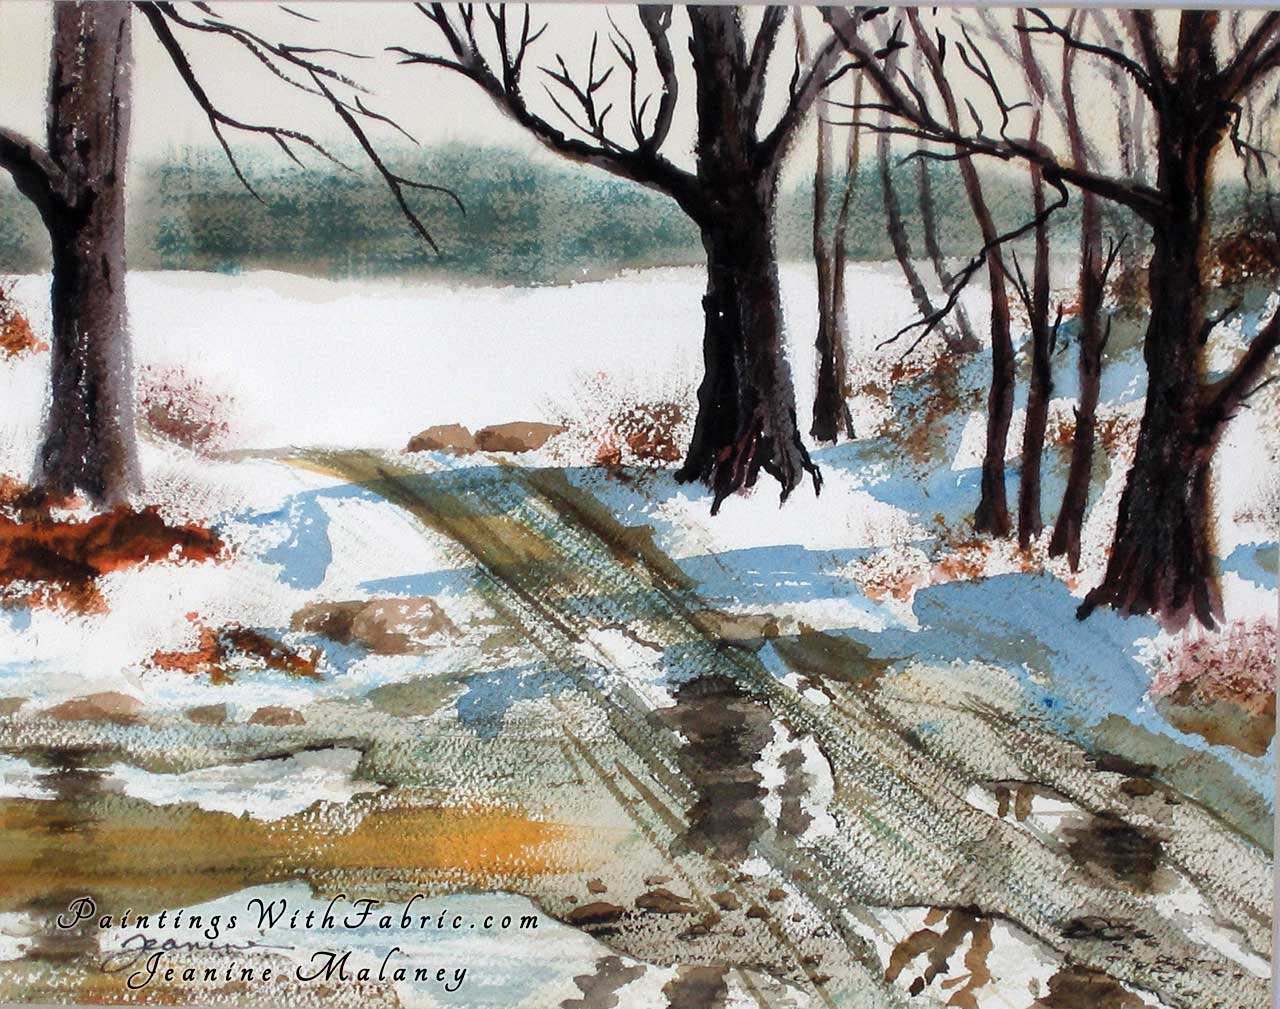 Spring Melt Unframed Original Watercolor Painting of a midwest driveway in early spring